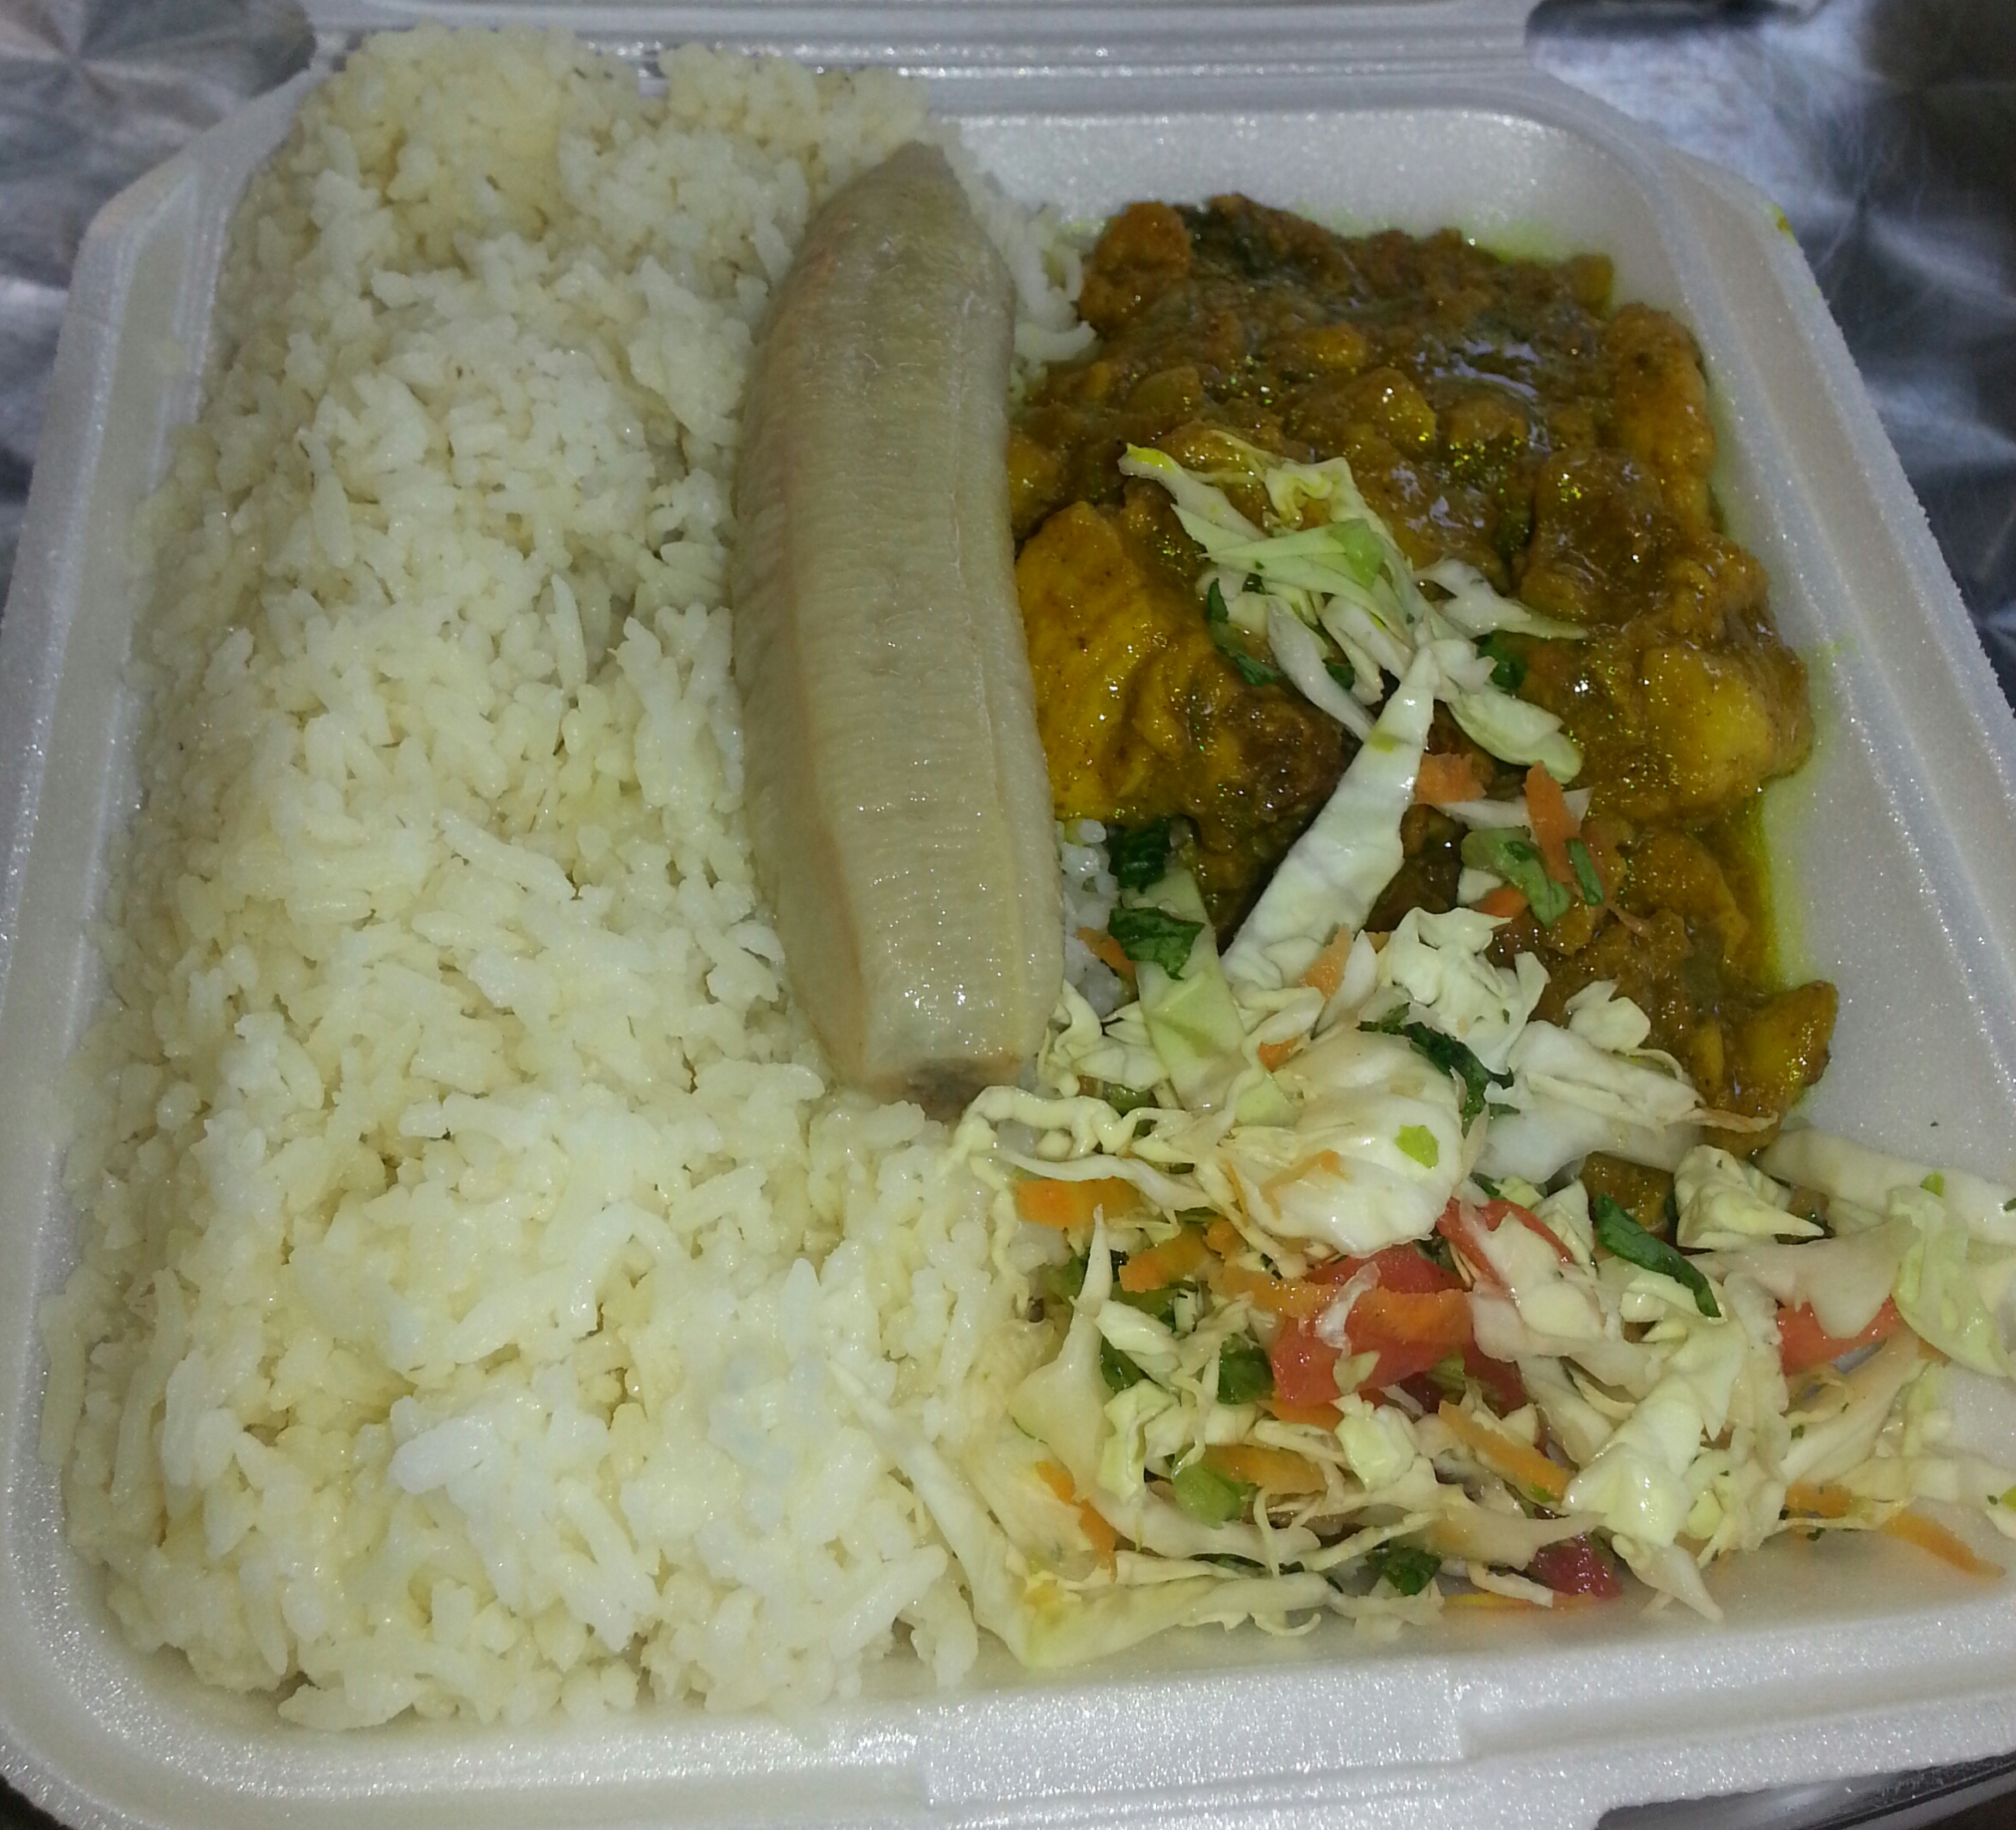 Curried goat with plain rice, boiled banana and raw vegetables